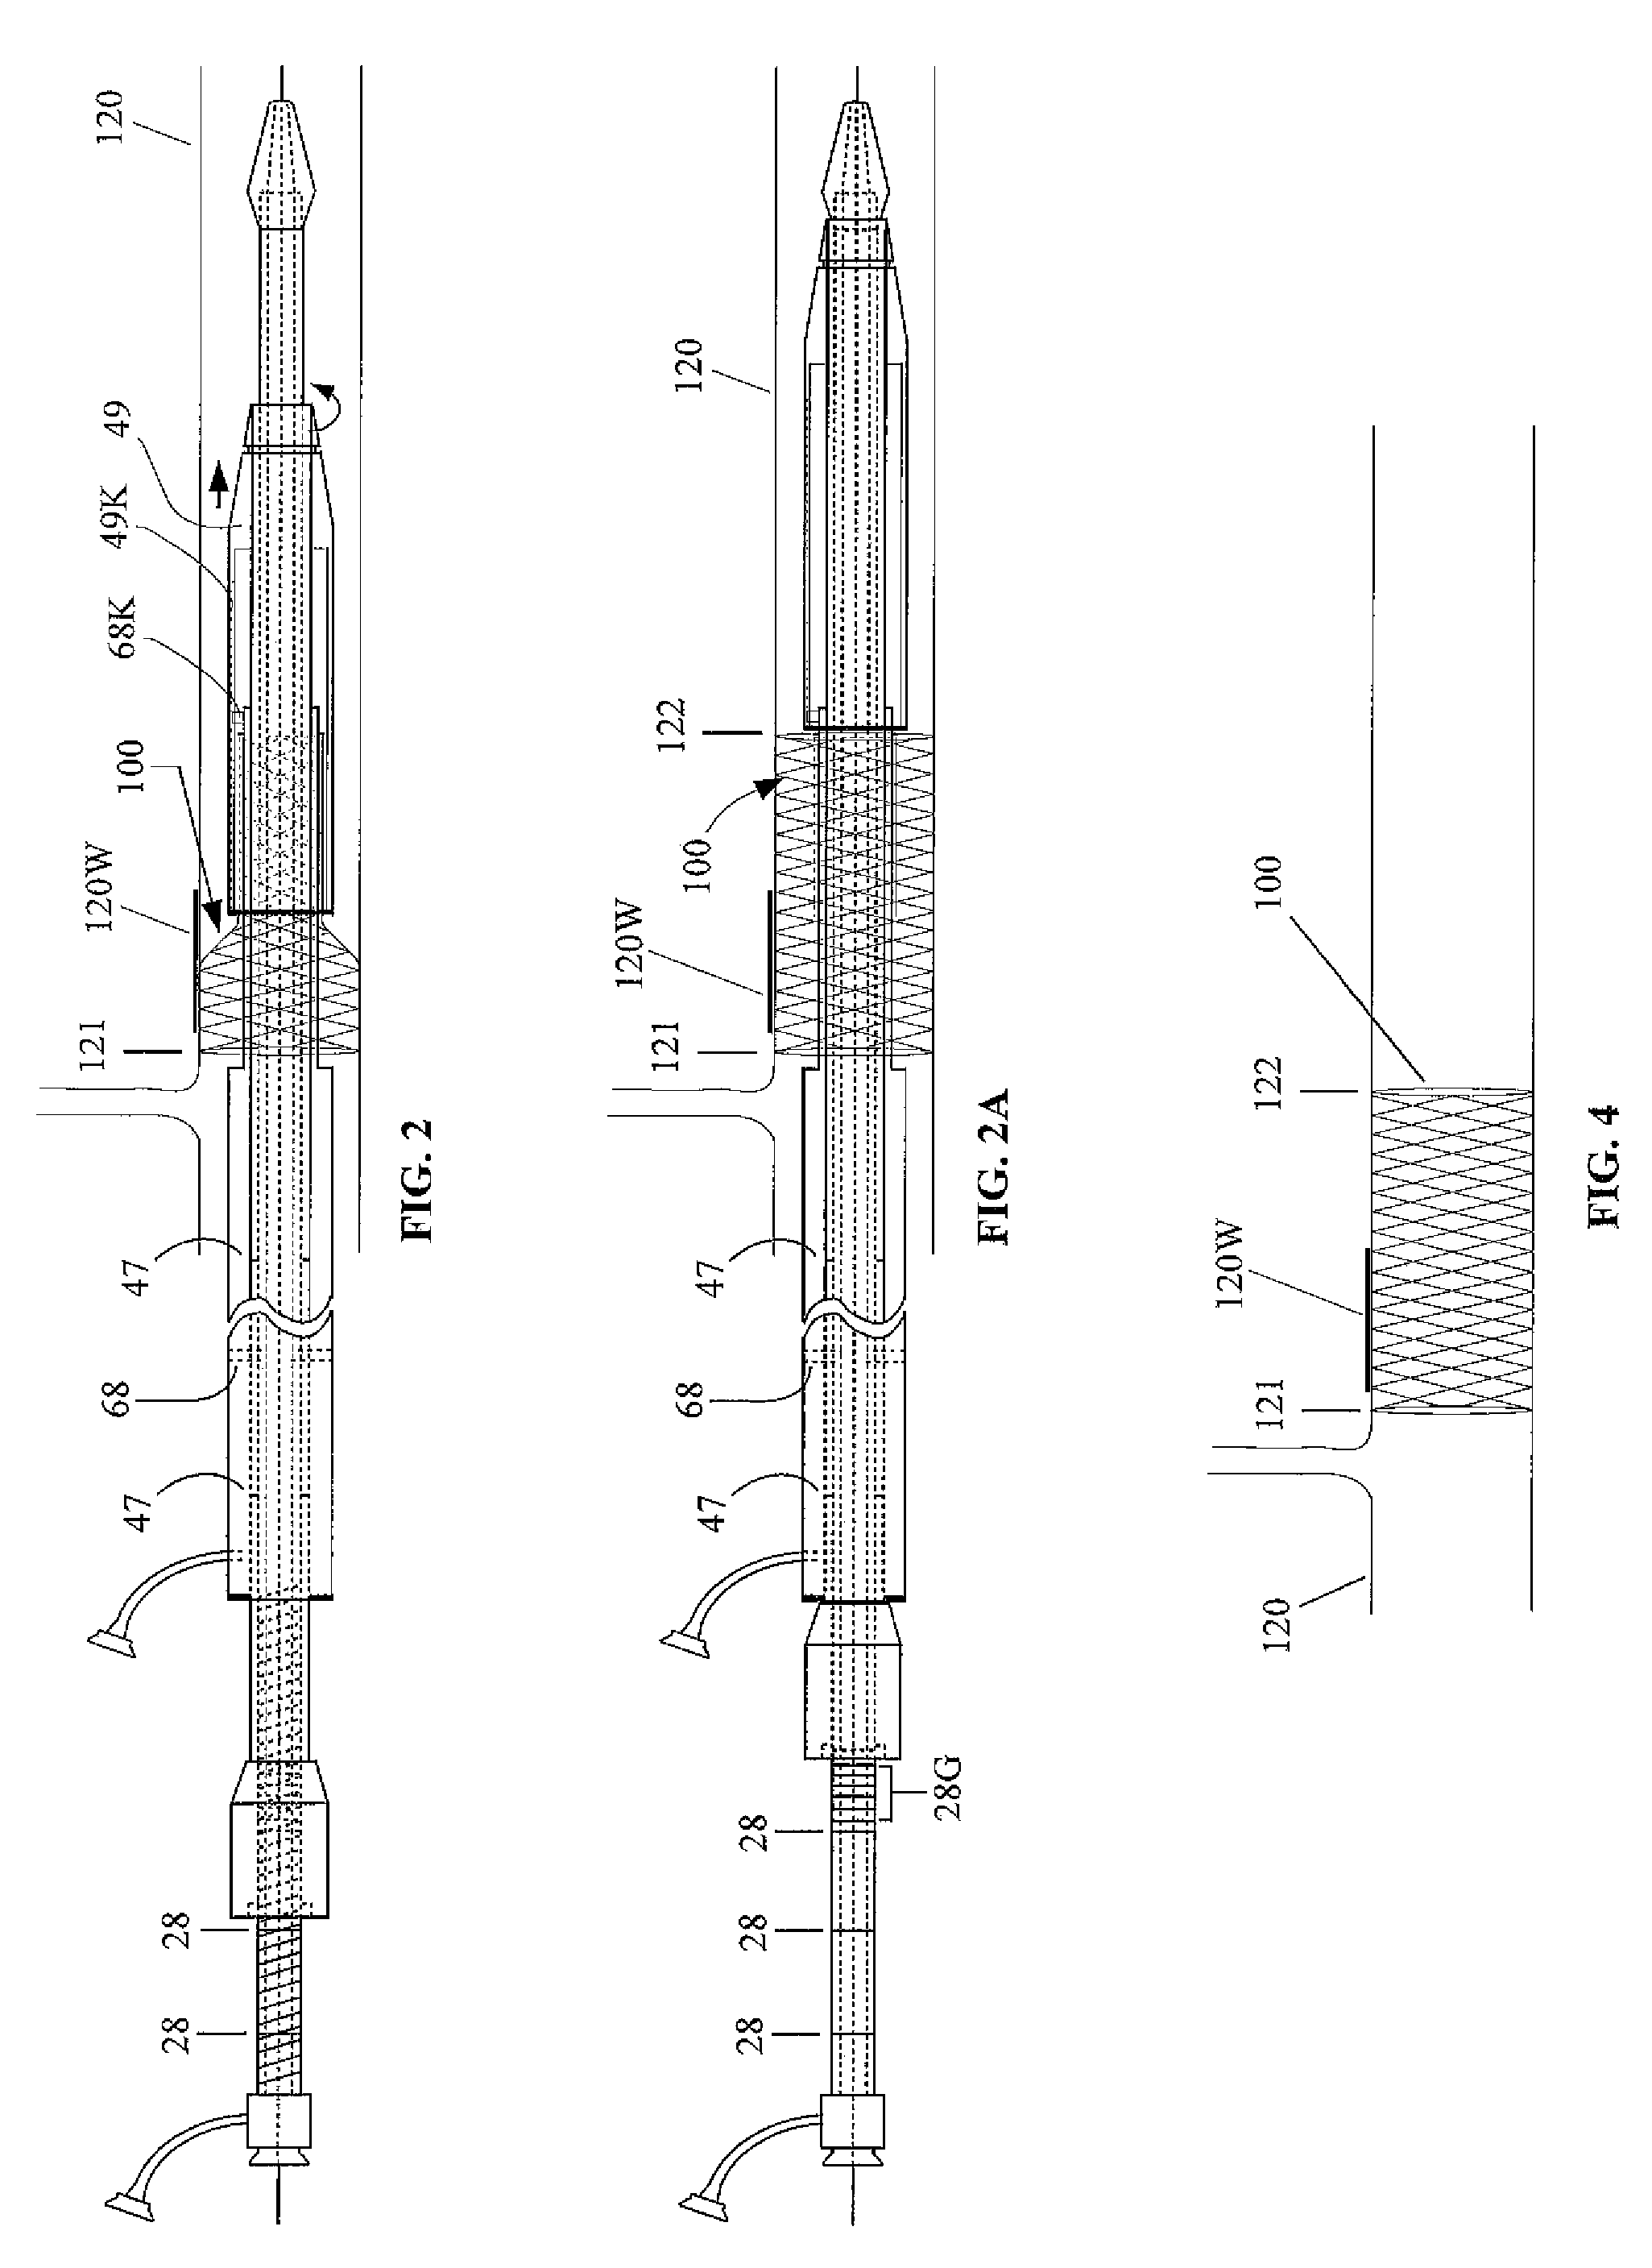 Apparatus And Method for Proximal-to-Distal Endoluminal Stent Deployment